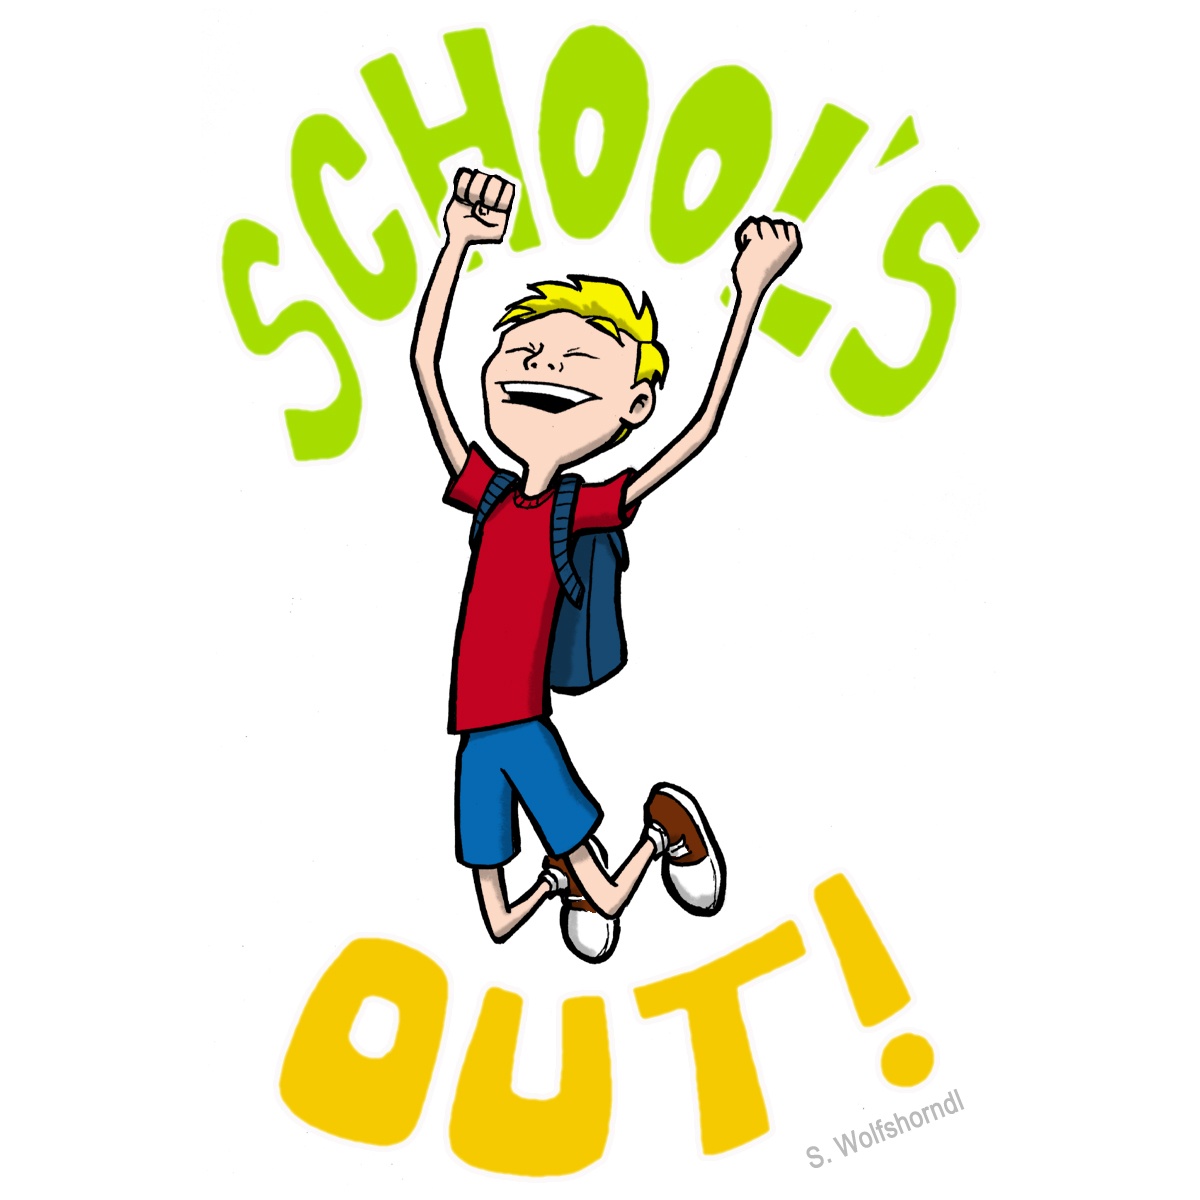 Last Day Of School Clipart